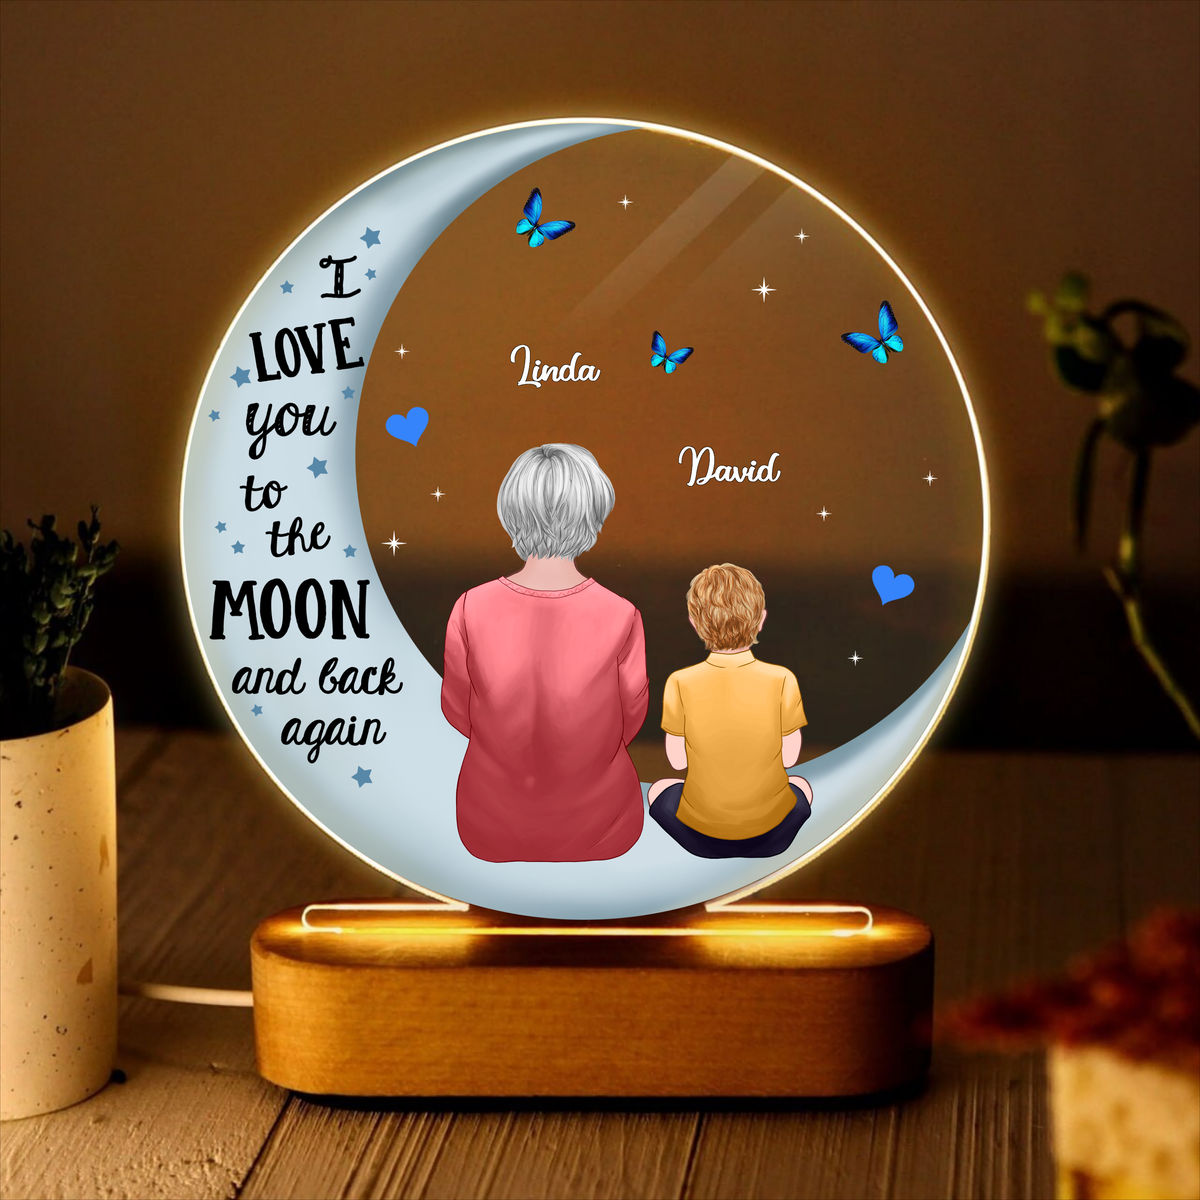 Personalized Circle Plaque LED Night Light - I love you to the moon and back again